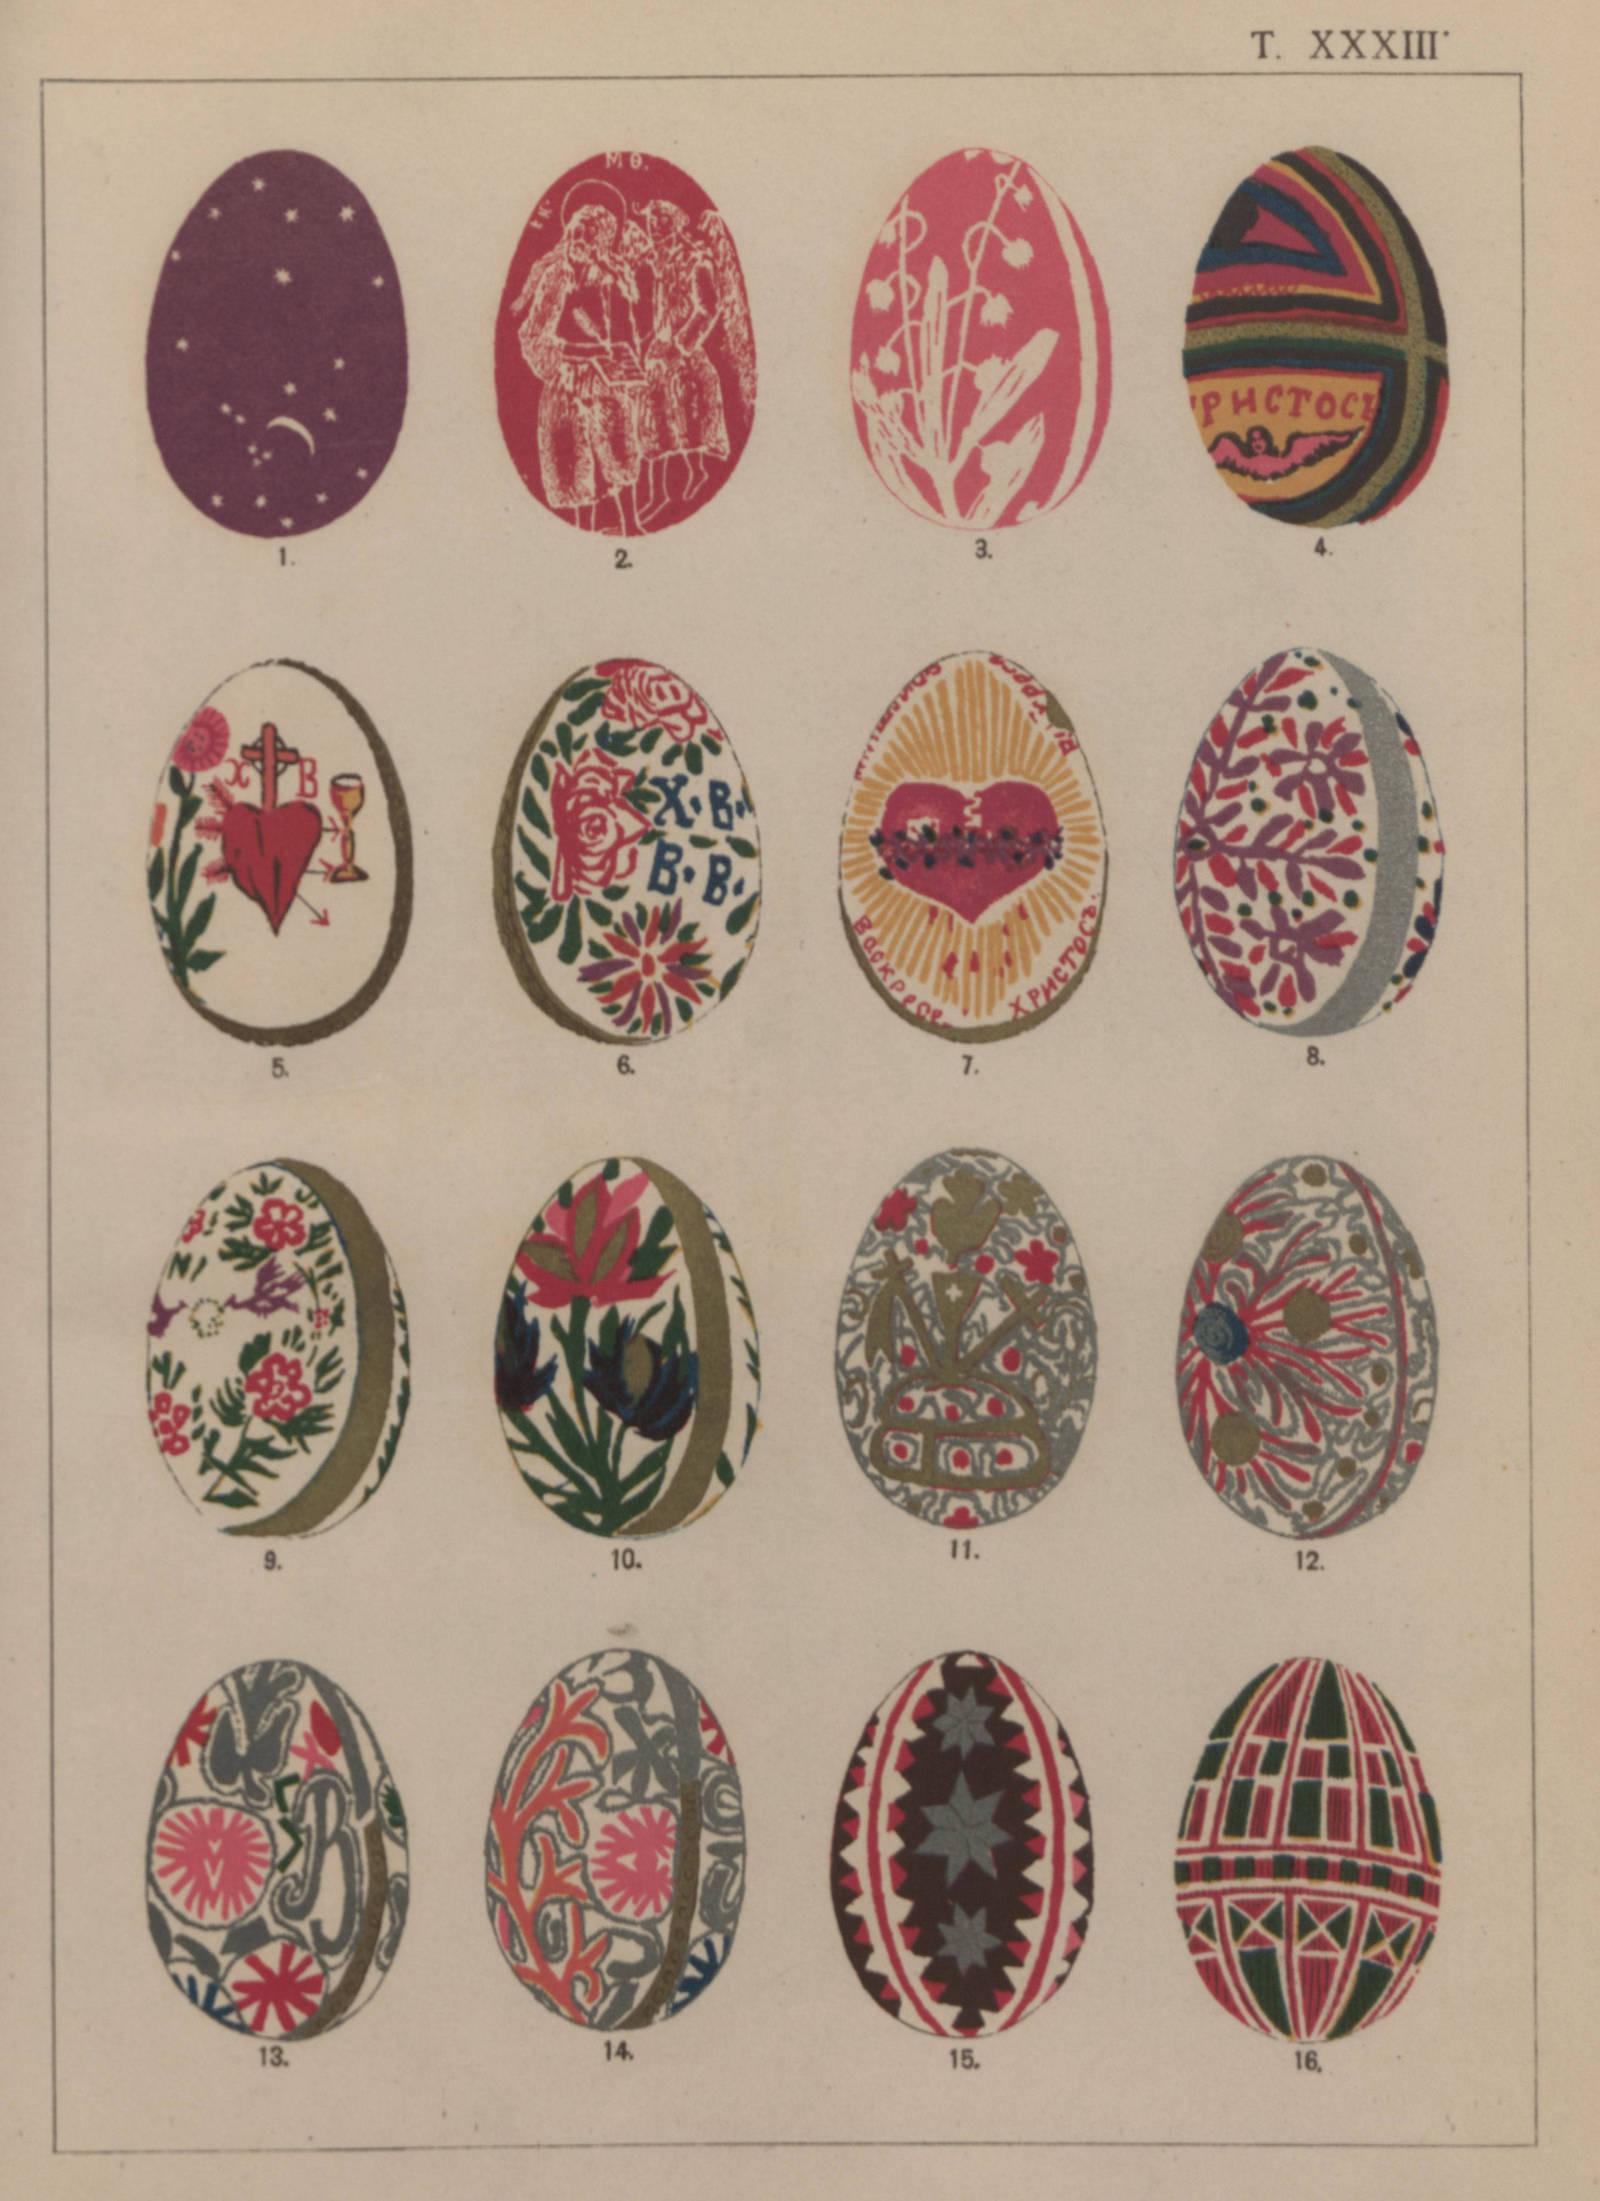 A mixtures of colors and representational designs. A few 'sacred heart' eggs are featured here with yellow dye. Plate 33 of Opisanīe kollektsii narodnykh pisanok, 1899.